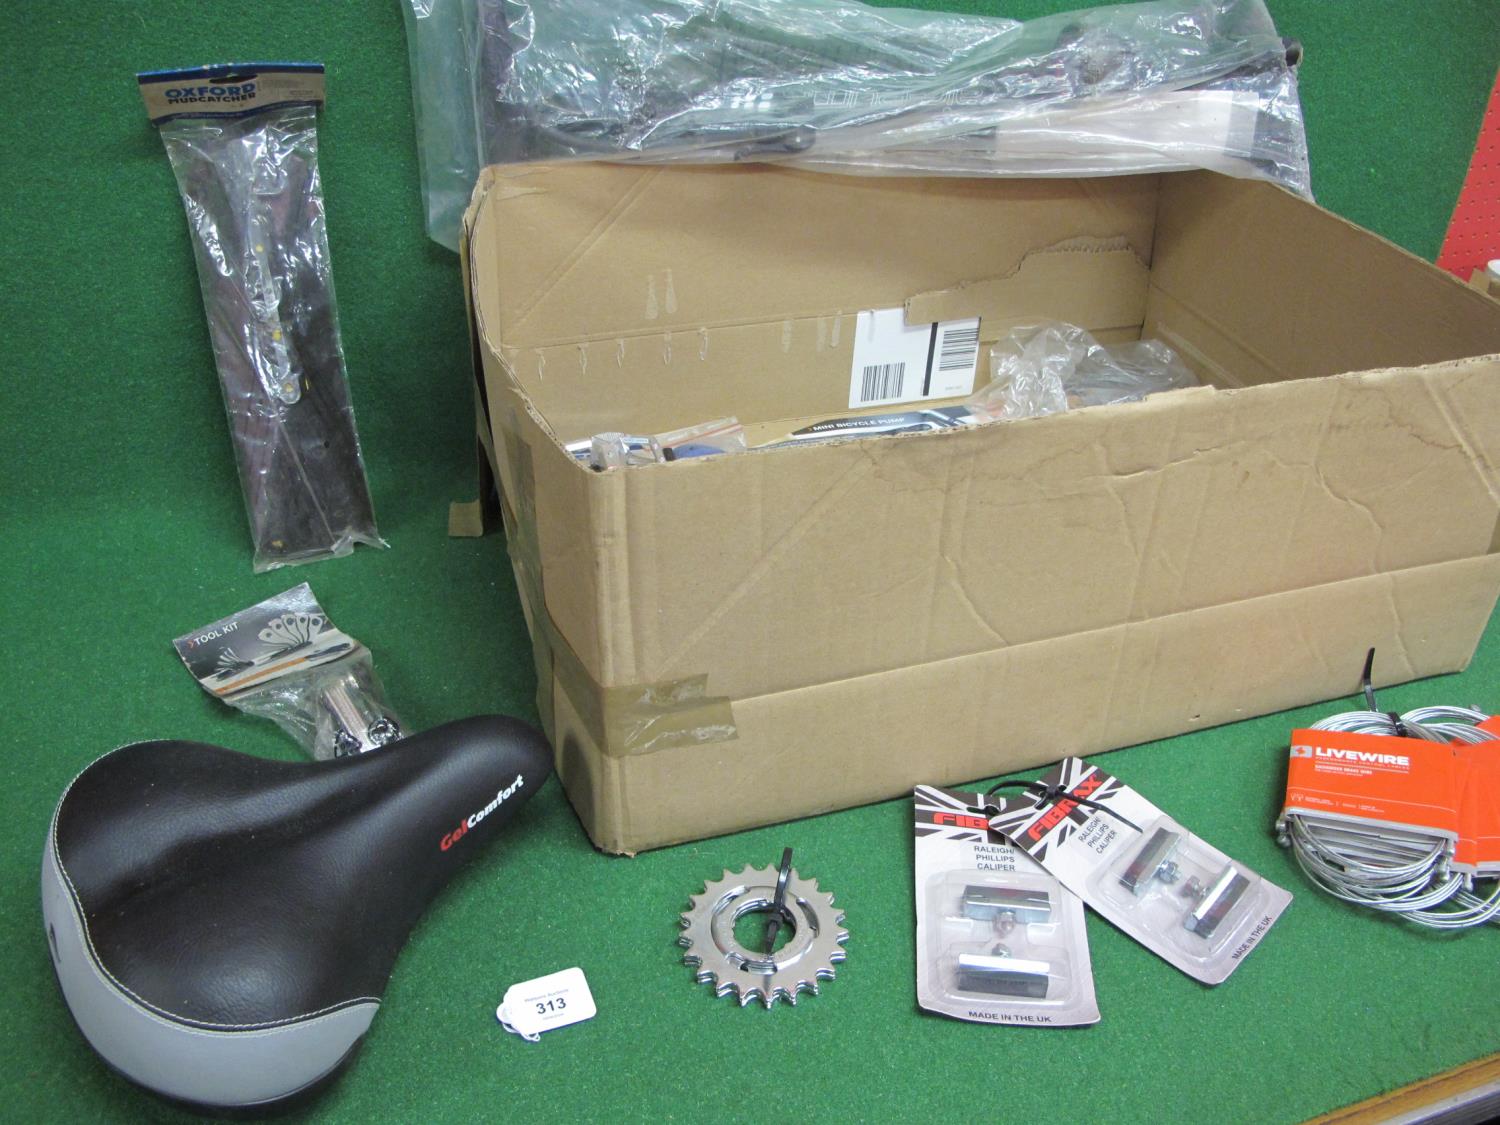 Box of new old stock bicycle items to include: rod brake blocks, cables, pumps, mud catcher, pedals, - Image 3 of 3